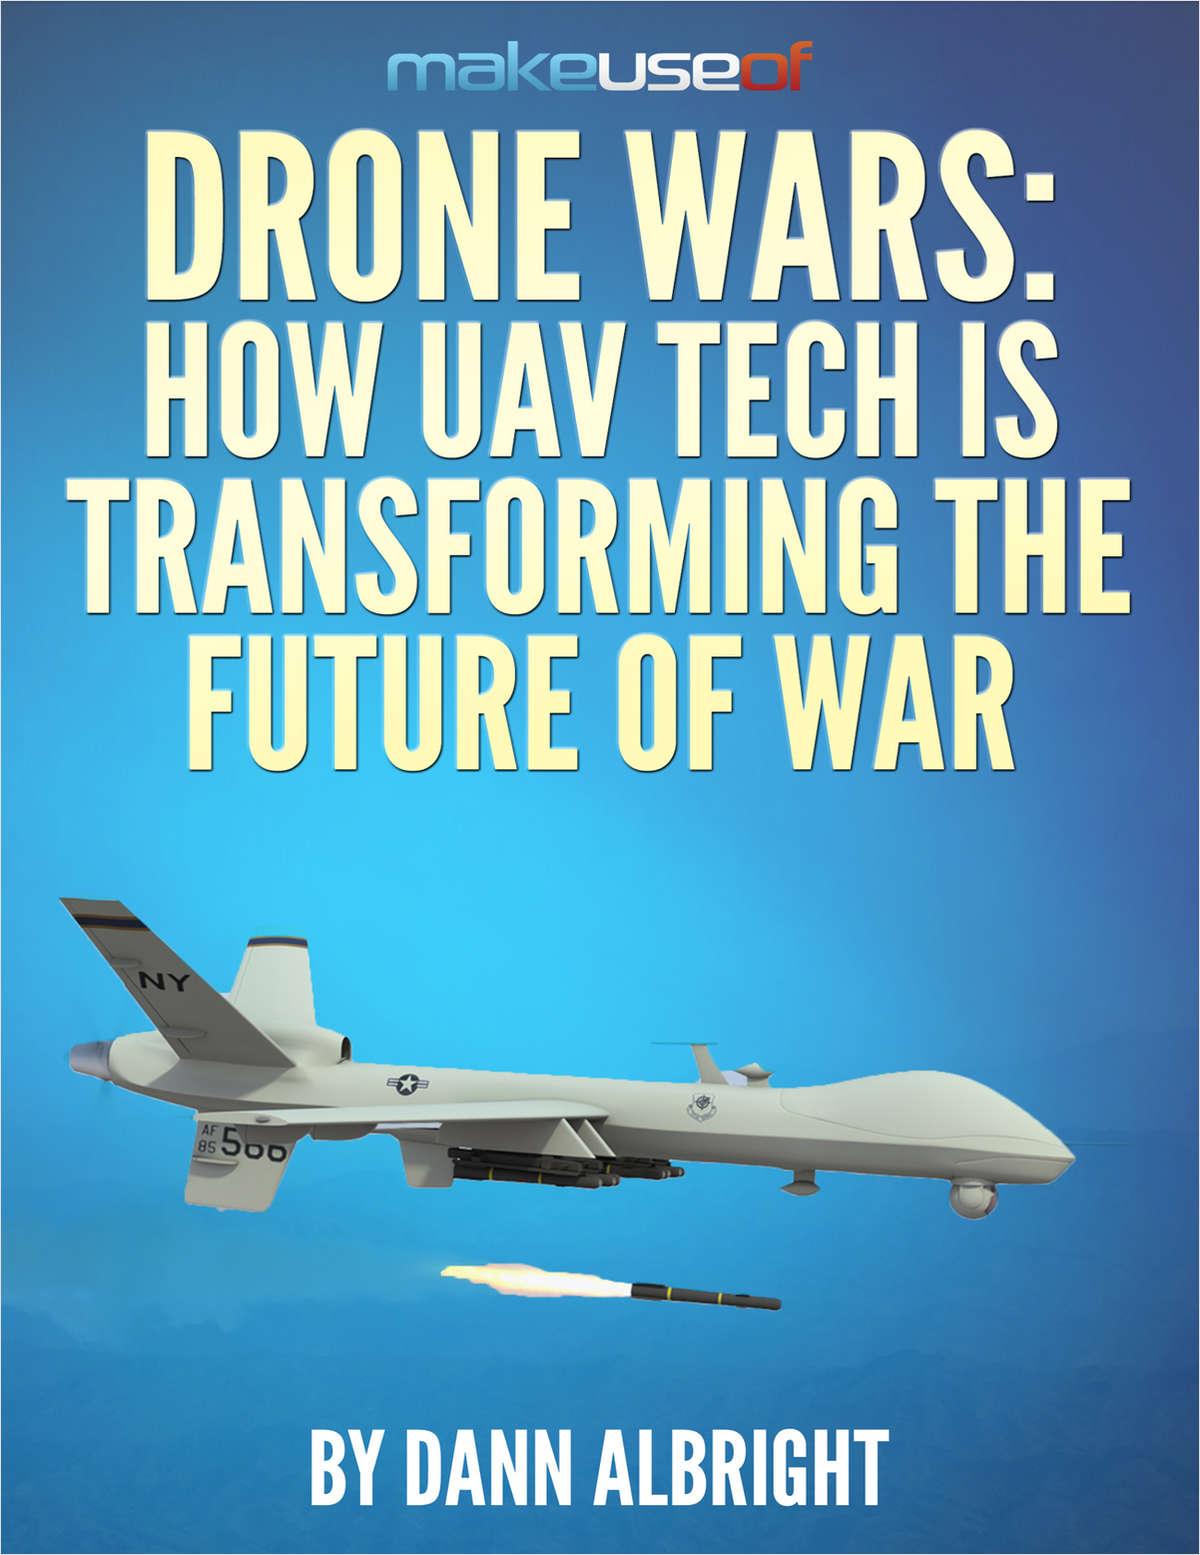 Drone Wars: How UAV Tech Is Transforming the Future of War